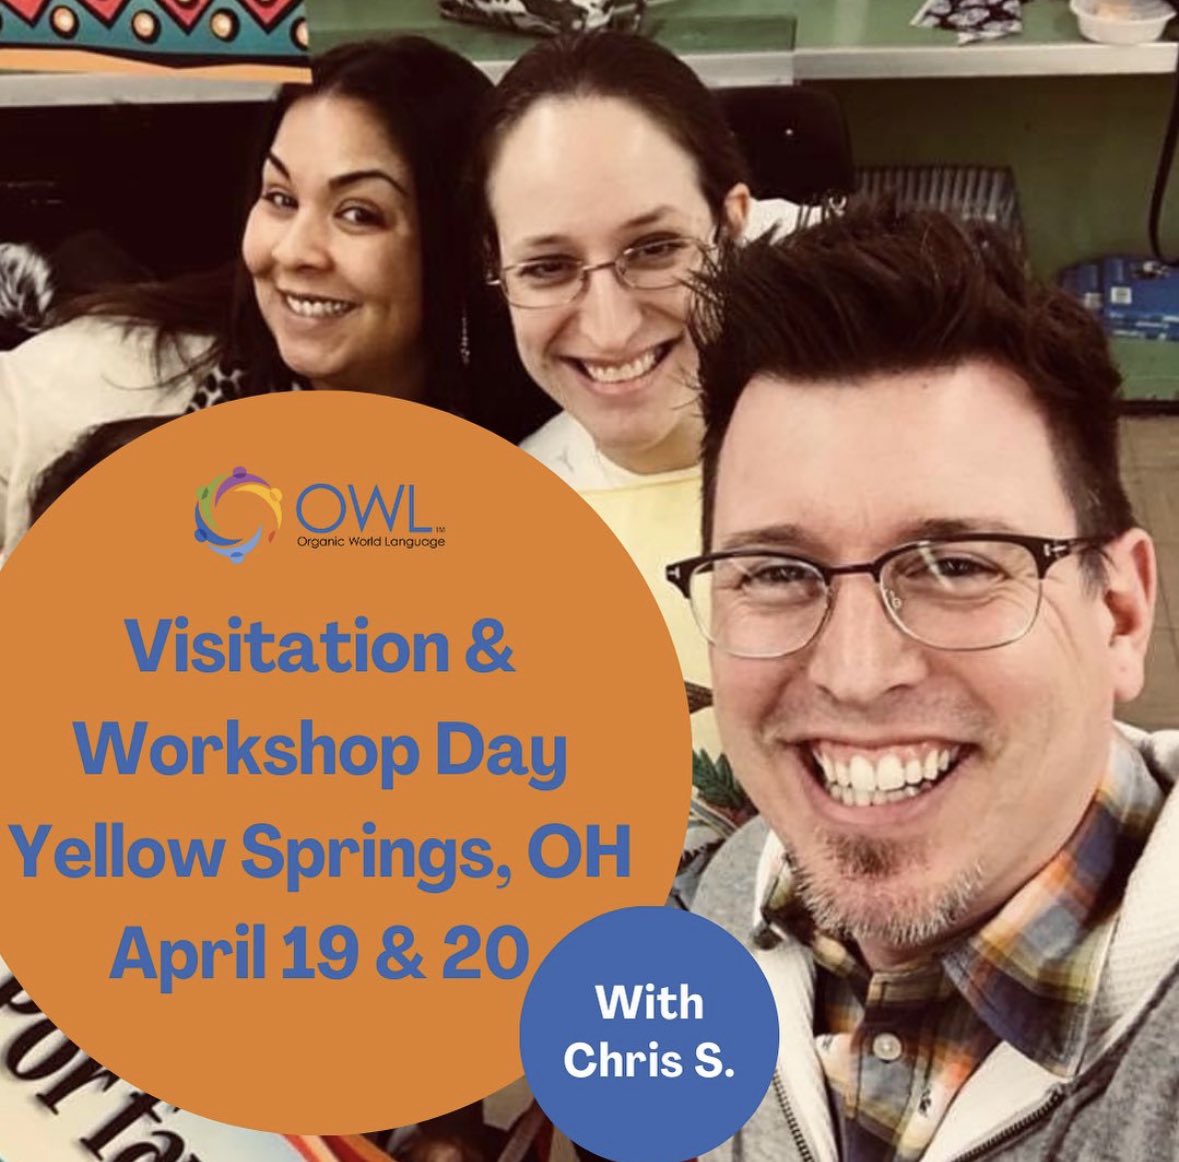 Join Visitation Days in OH! Participants will spend time in student-centered, proficiency-based classes observing & reflecting on strategies & techniques for a variety of levels. owlanguage.com/events/visitat… #owl #iloveowl #owlteachers #movementislearning #proficiencybasedtesching